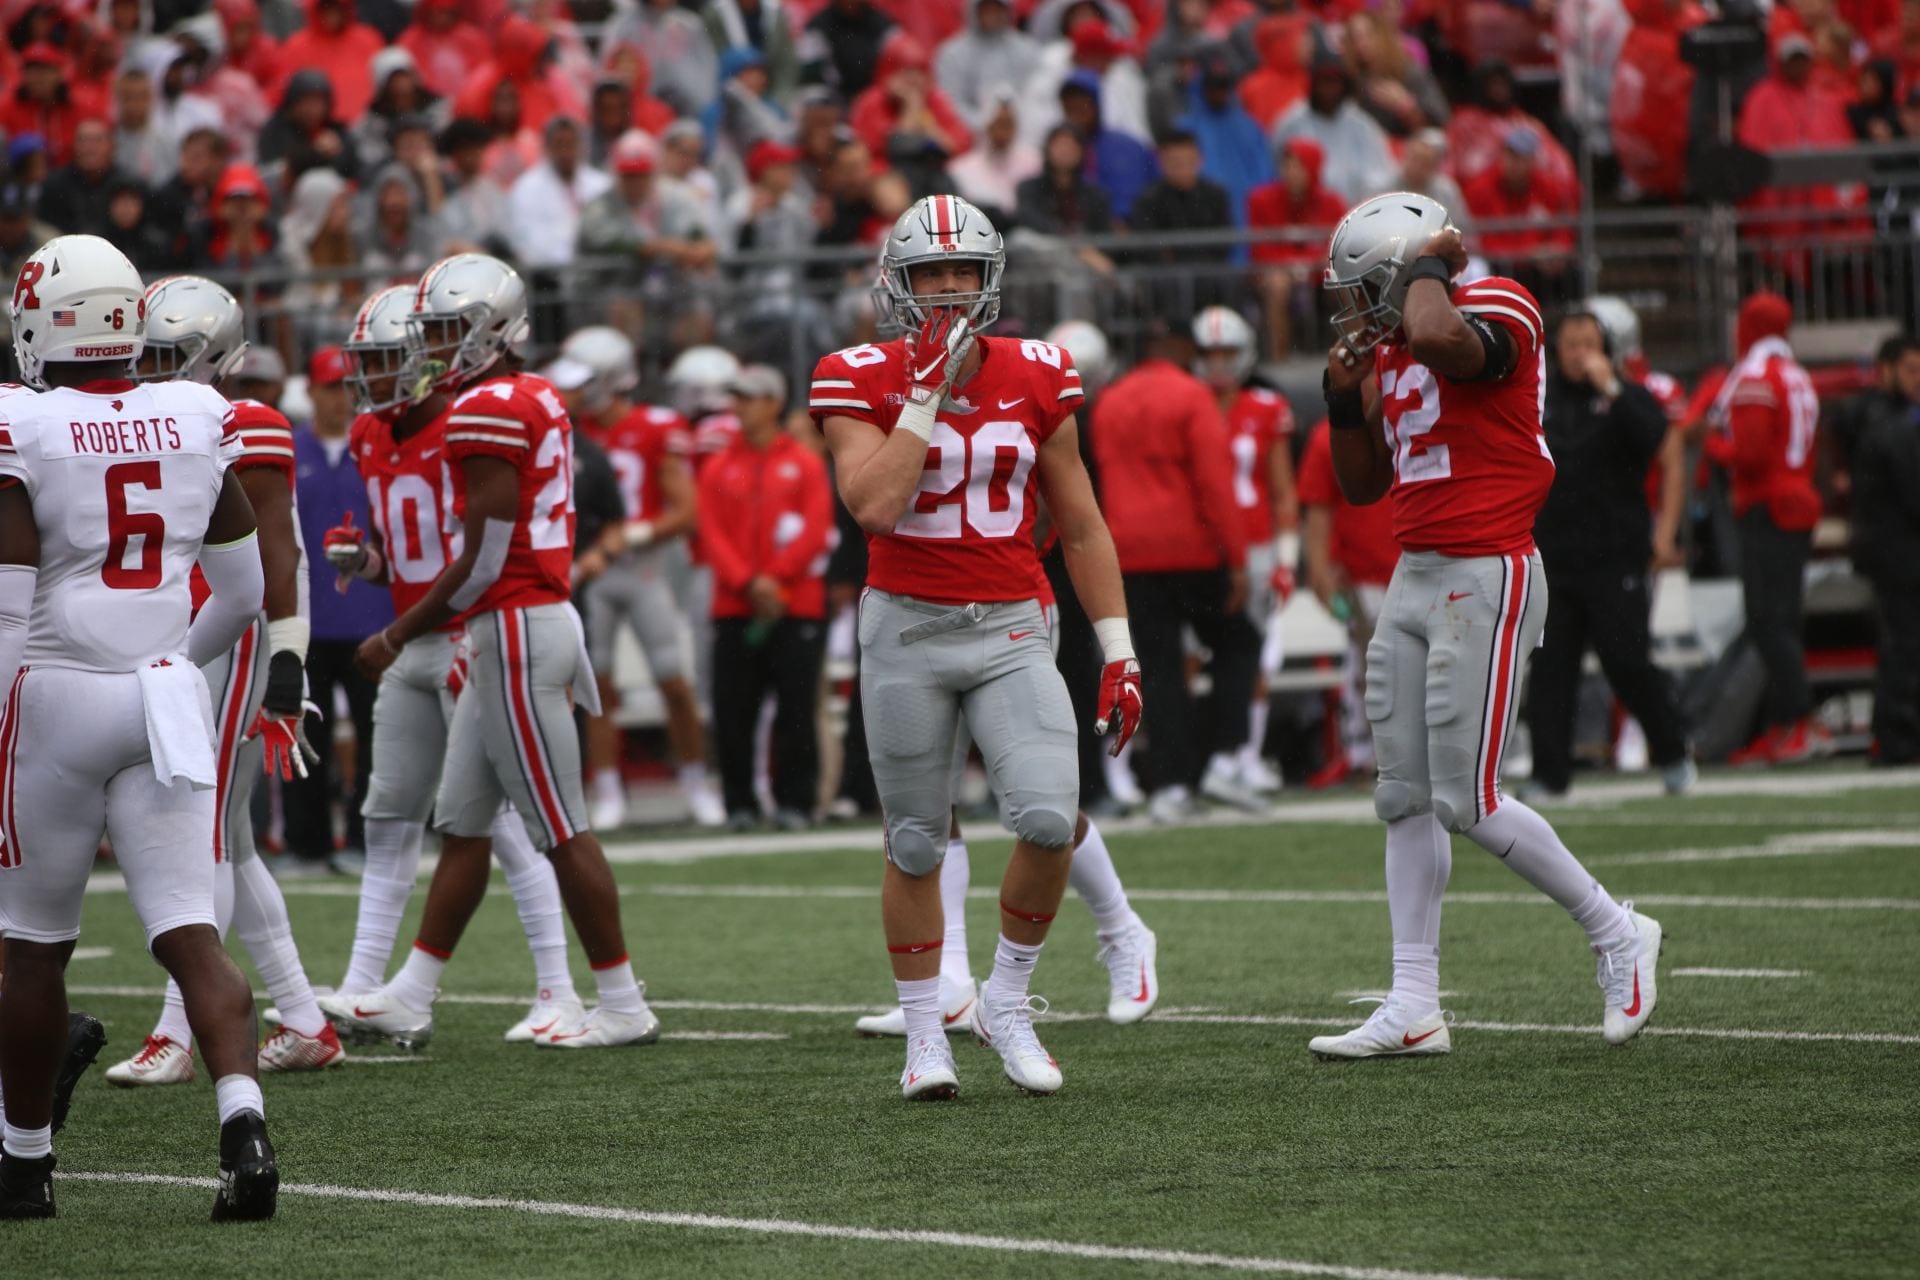 Pete Werner walks on the field at Ohio Stadium with teammates in the background